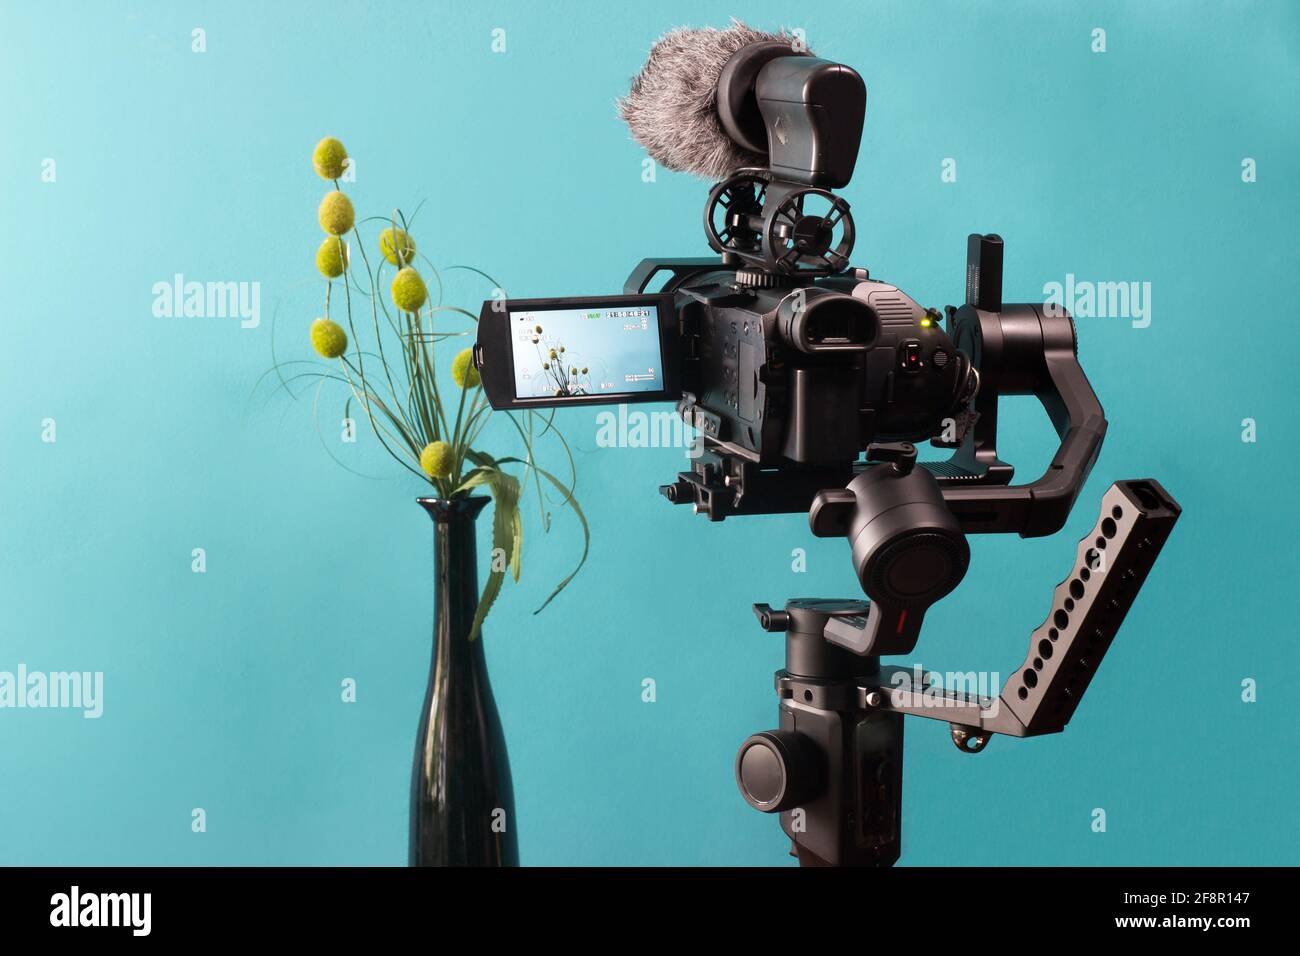 The camera on the gimbal shoots flowers in a vase. Turquoise background. Stock Photo